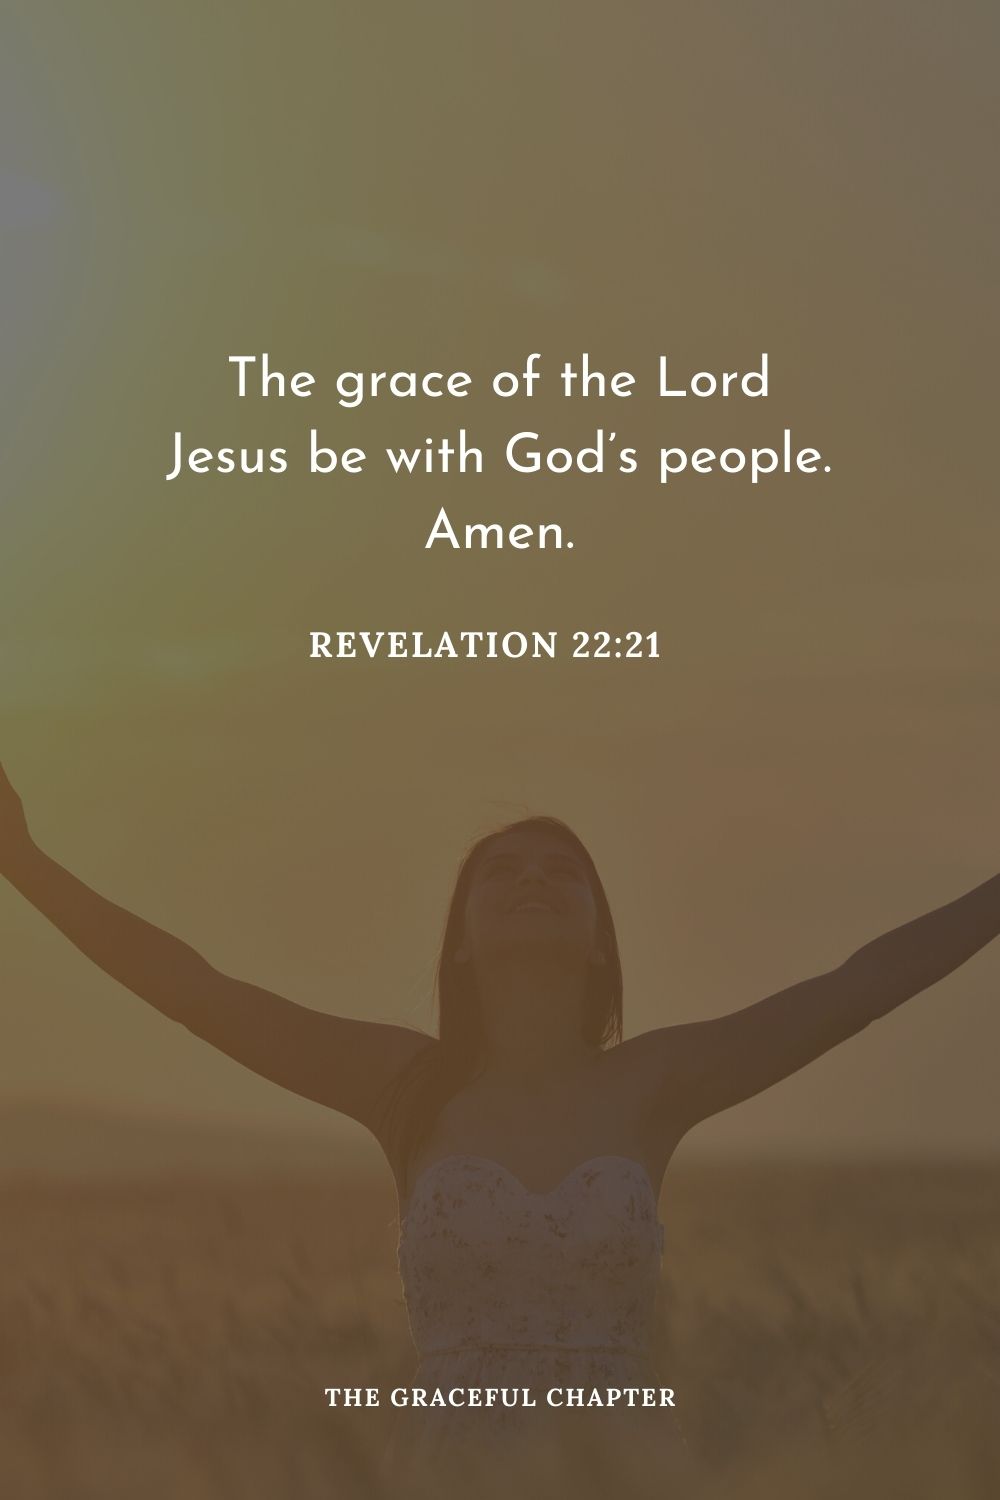 The grace of the Lord Jesus be with God’s people. Amen.